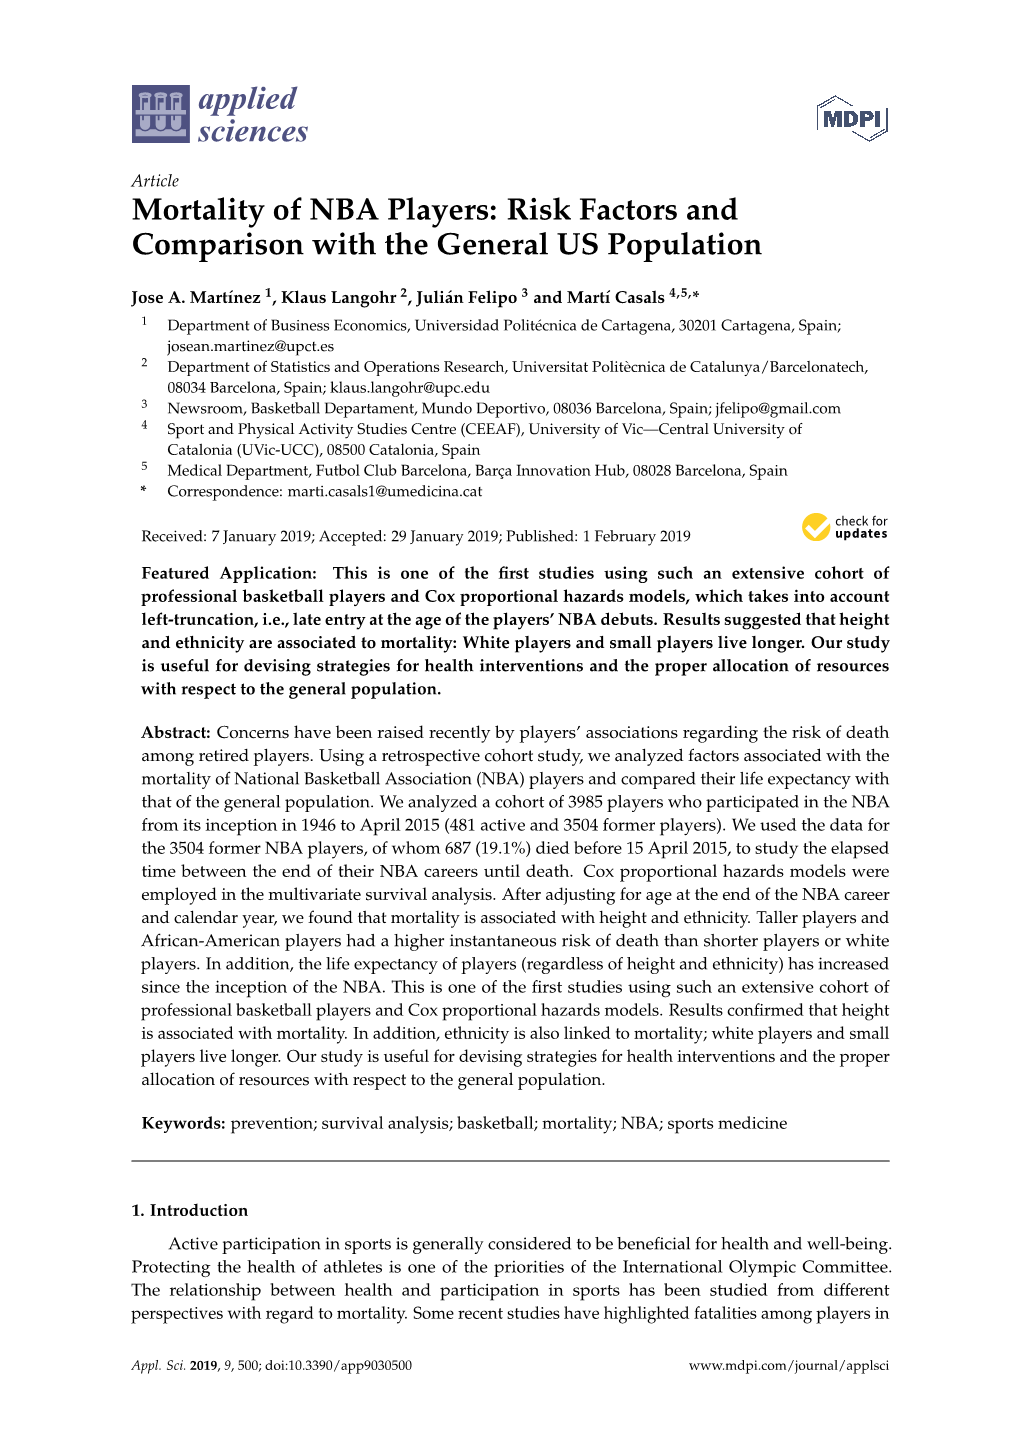 Mortality of NBA Players: Risk Factors and Comparison with the General US Population